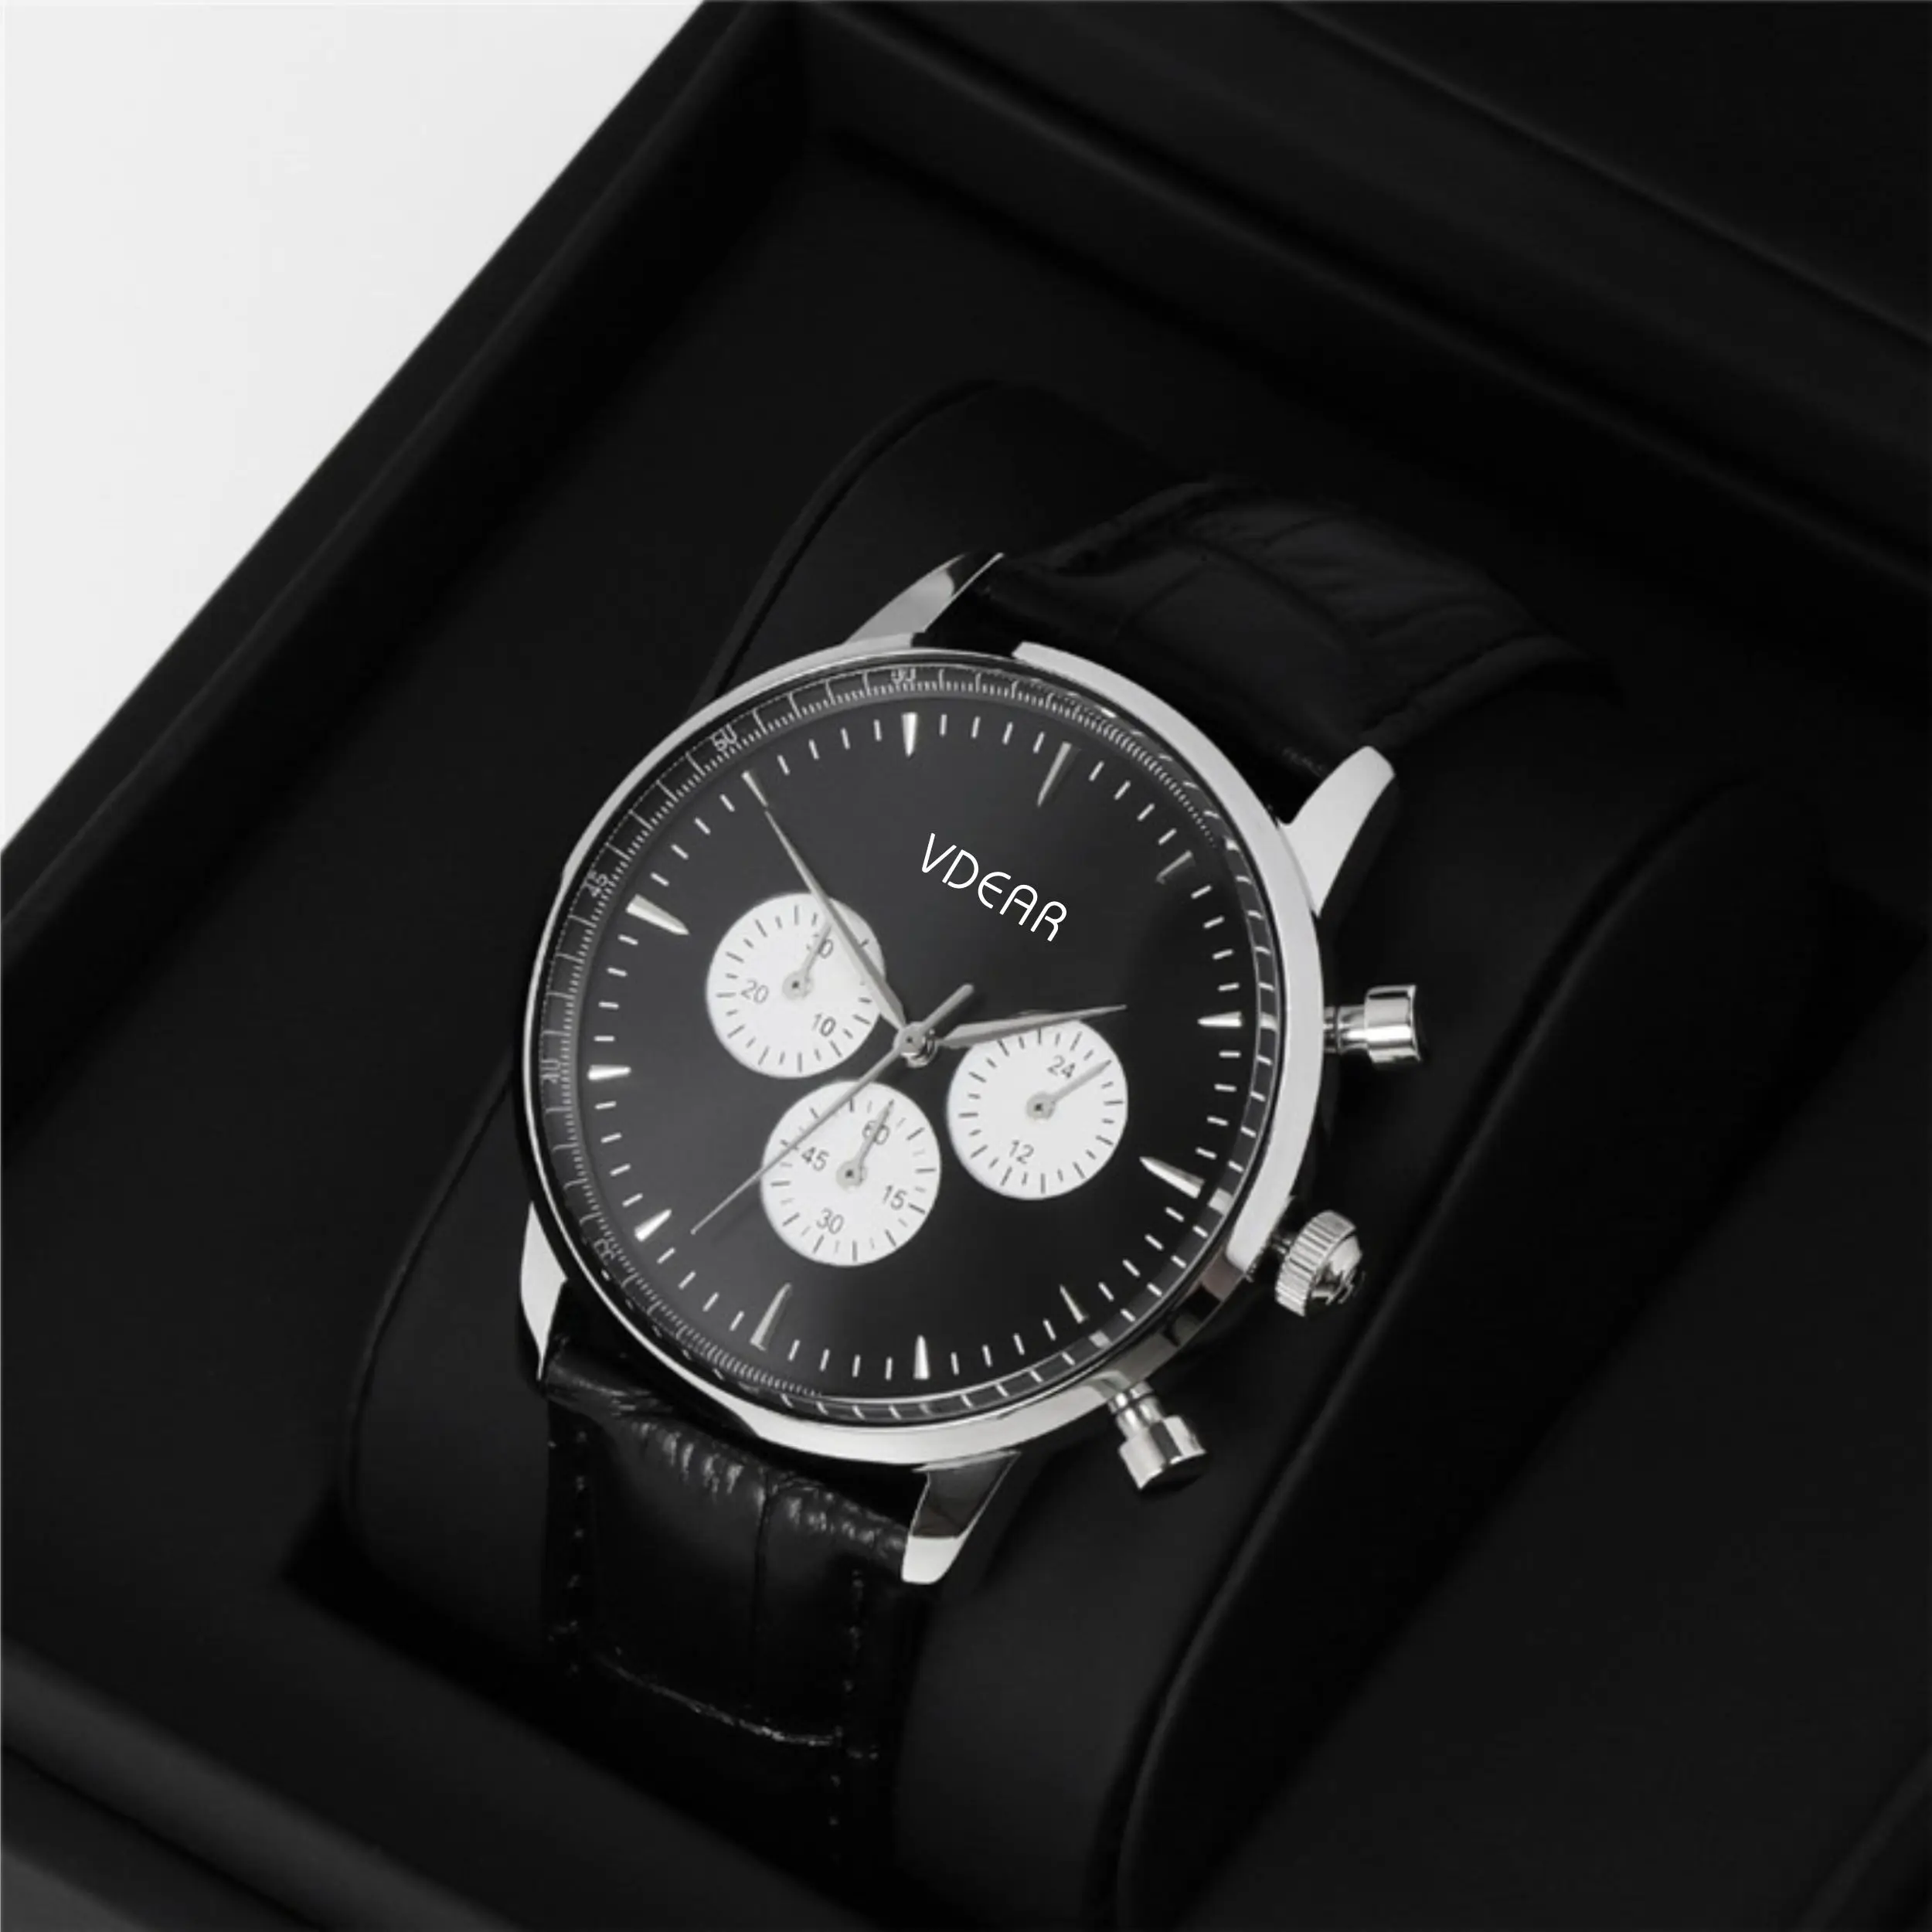 Limited Edition High Quality Sapphire Glass Watch Chronograph Men Watch Own Brand 2018